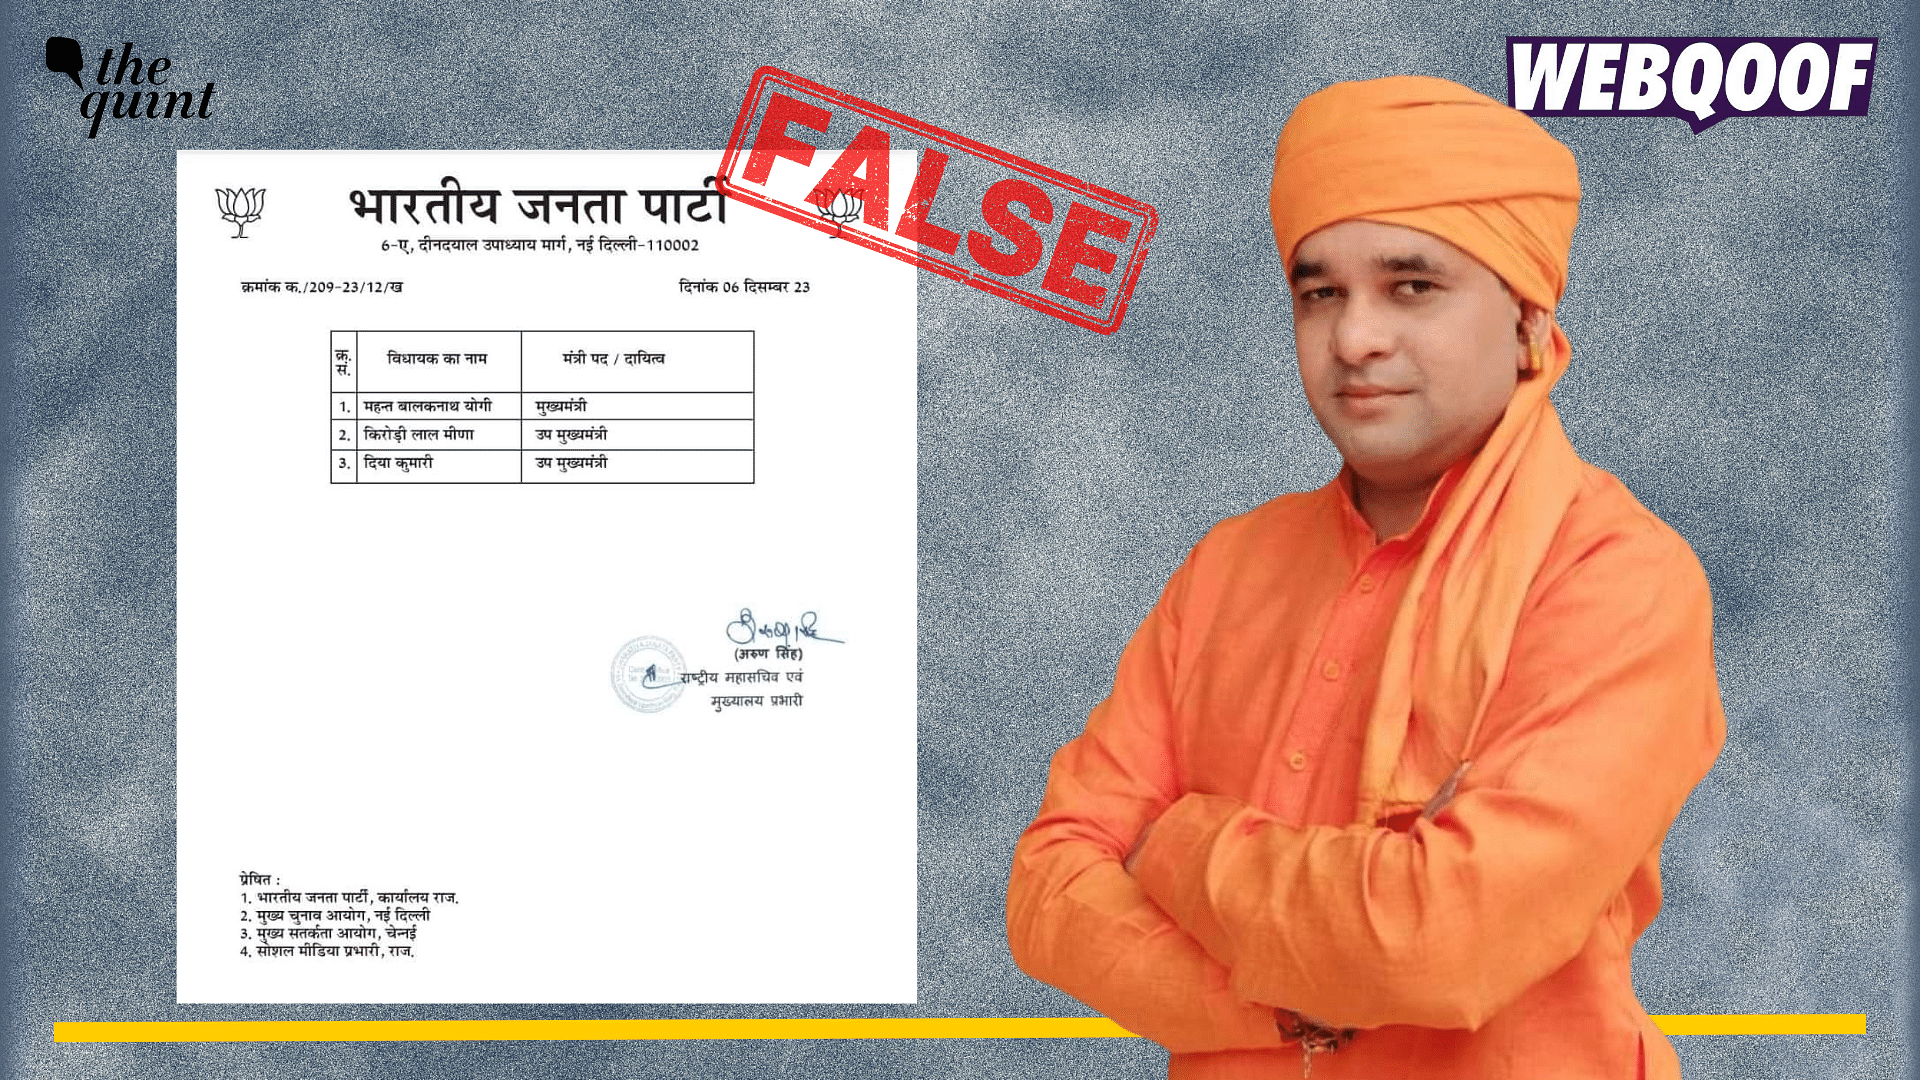 Fake Letter Goes Viral to Claim That Balak Nath Has Become Rajasthan's New CM